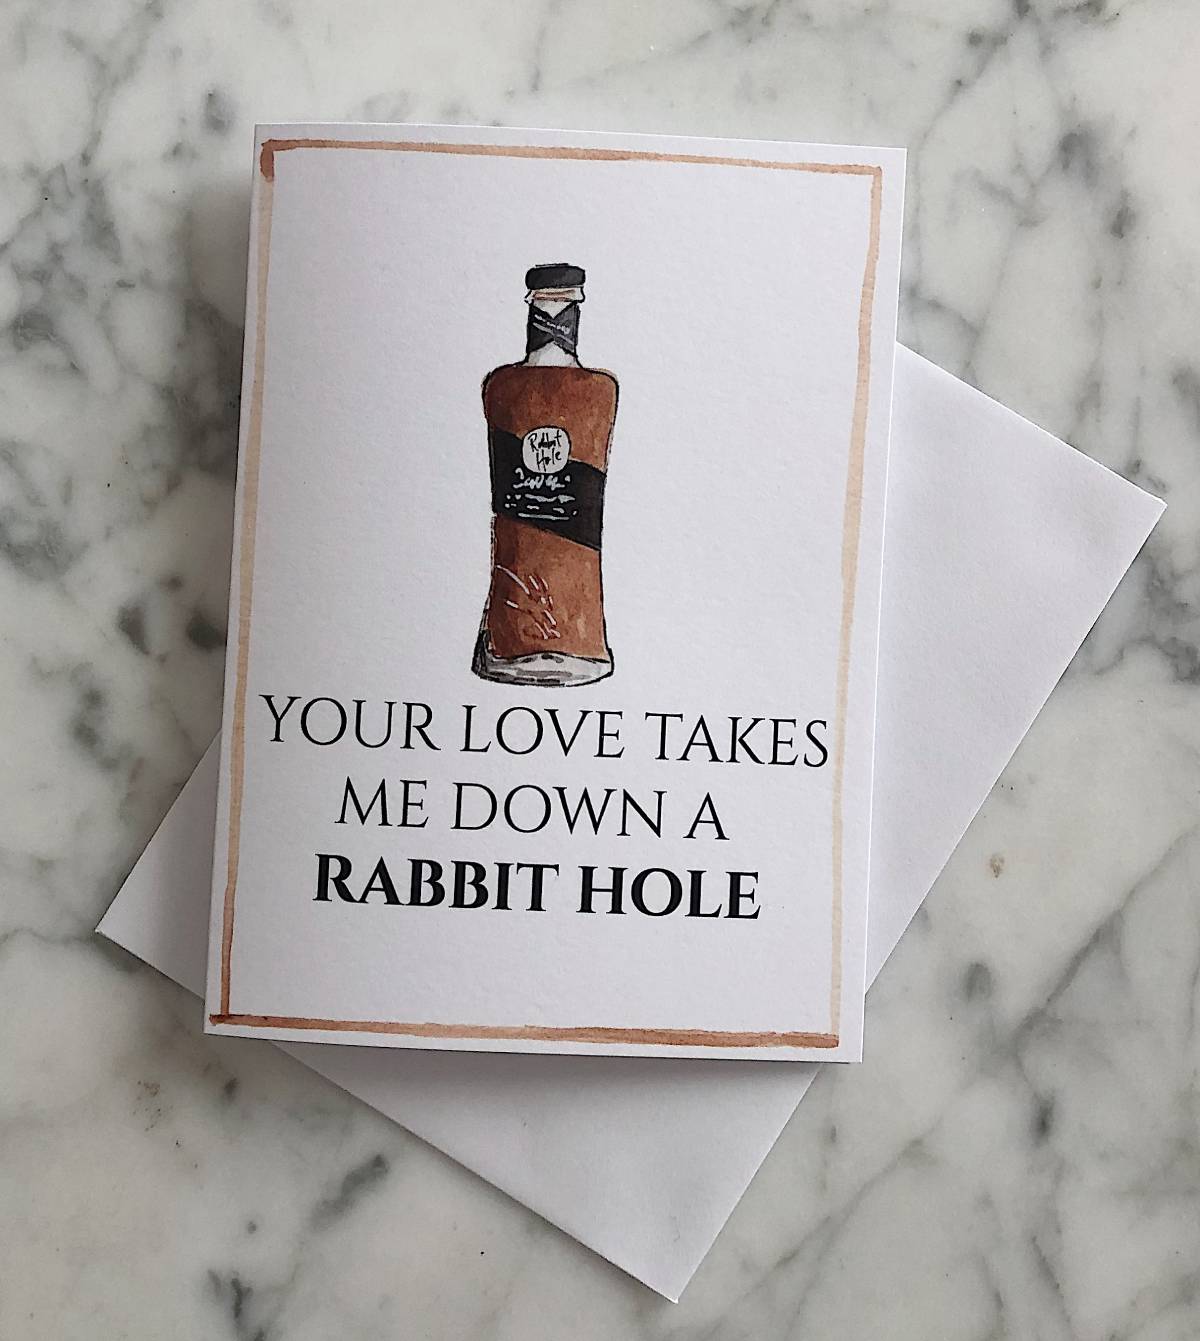 A white bourbon Valentine's Day card with an illustration of Rabbit Hole bourbon and the text "your love takes me down a rabbit hole"